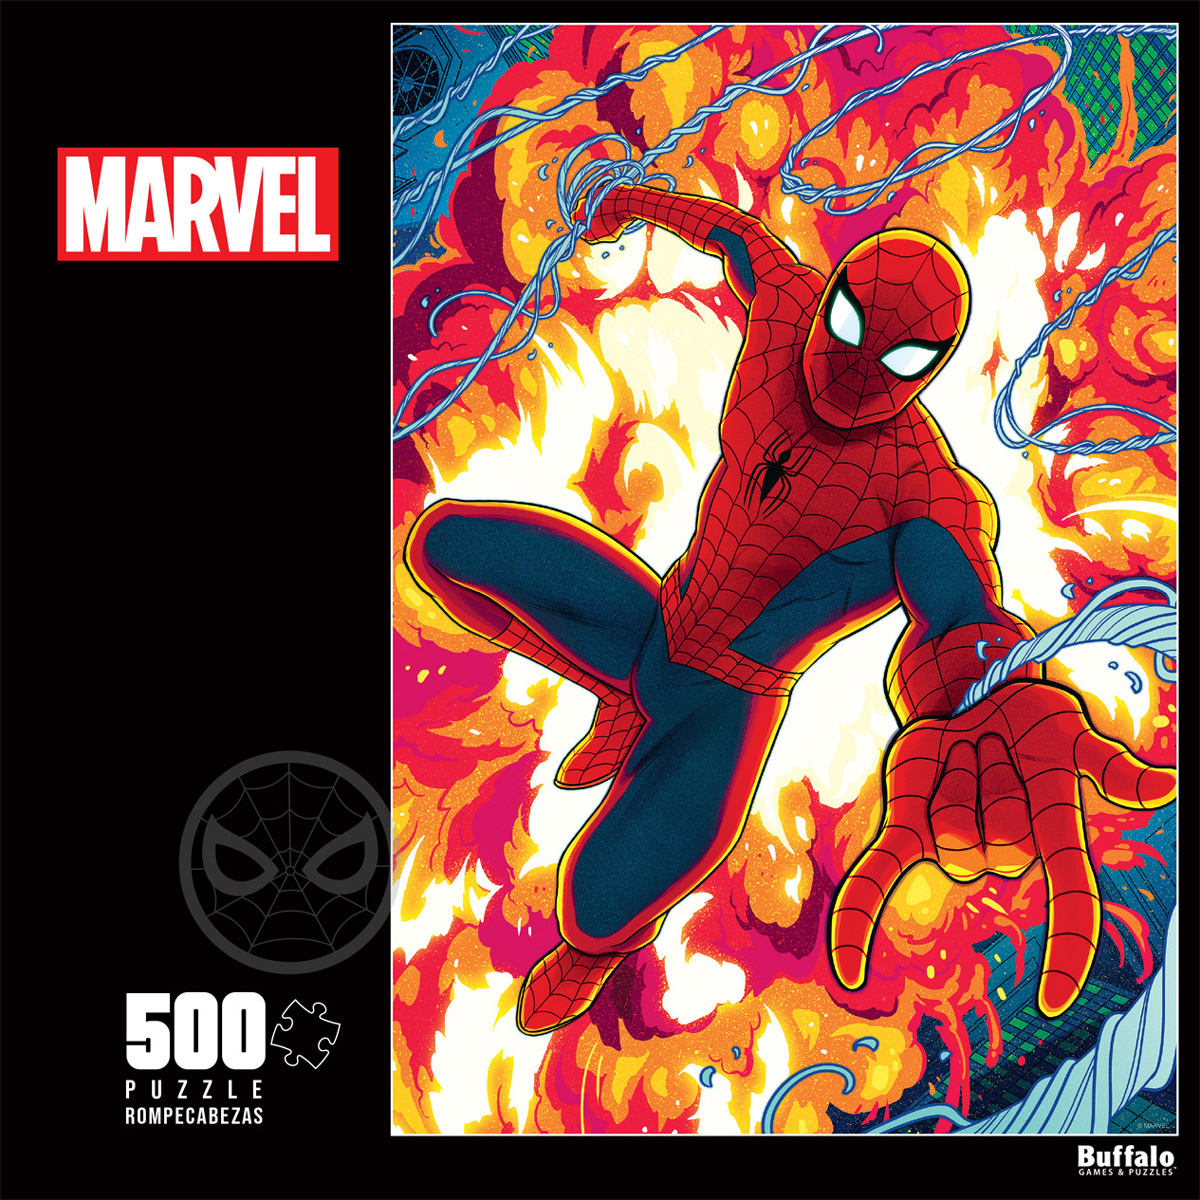 Marvel Tales featuring Spider-Man